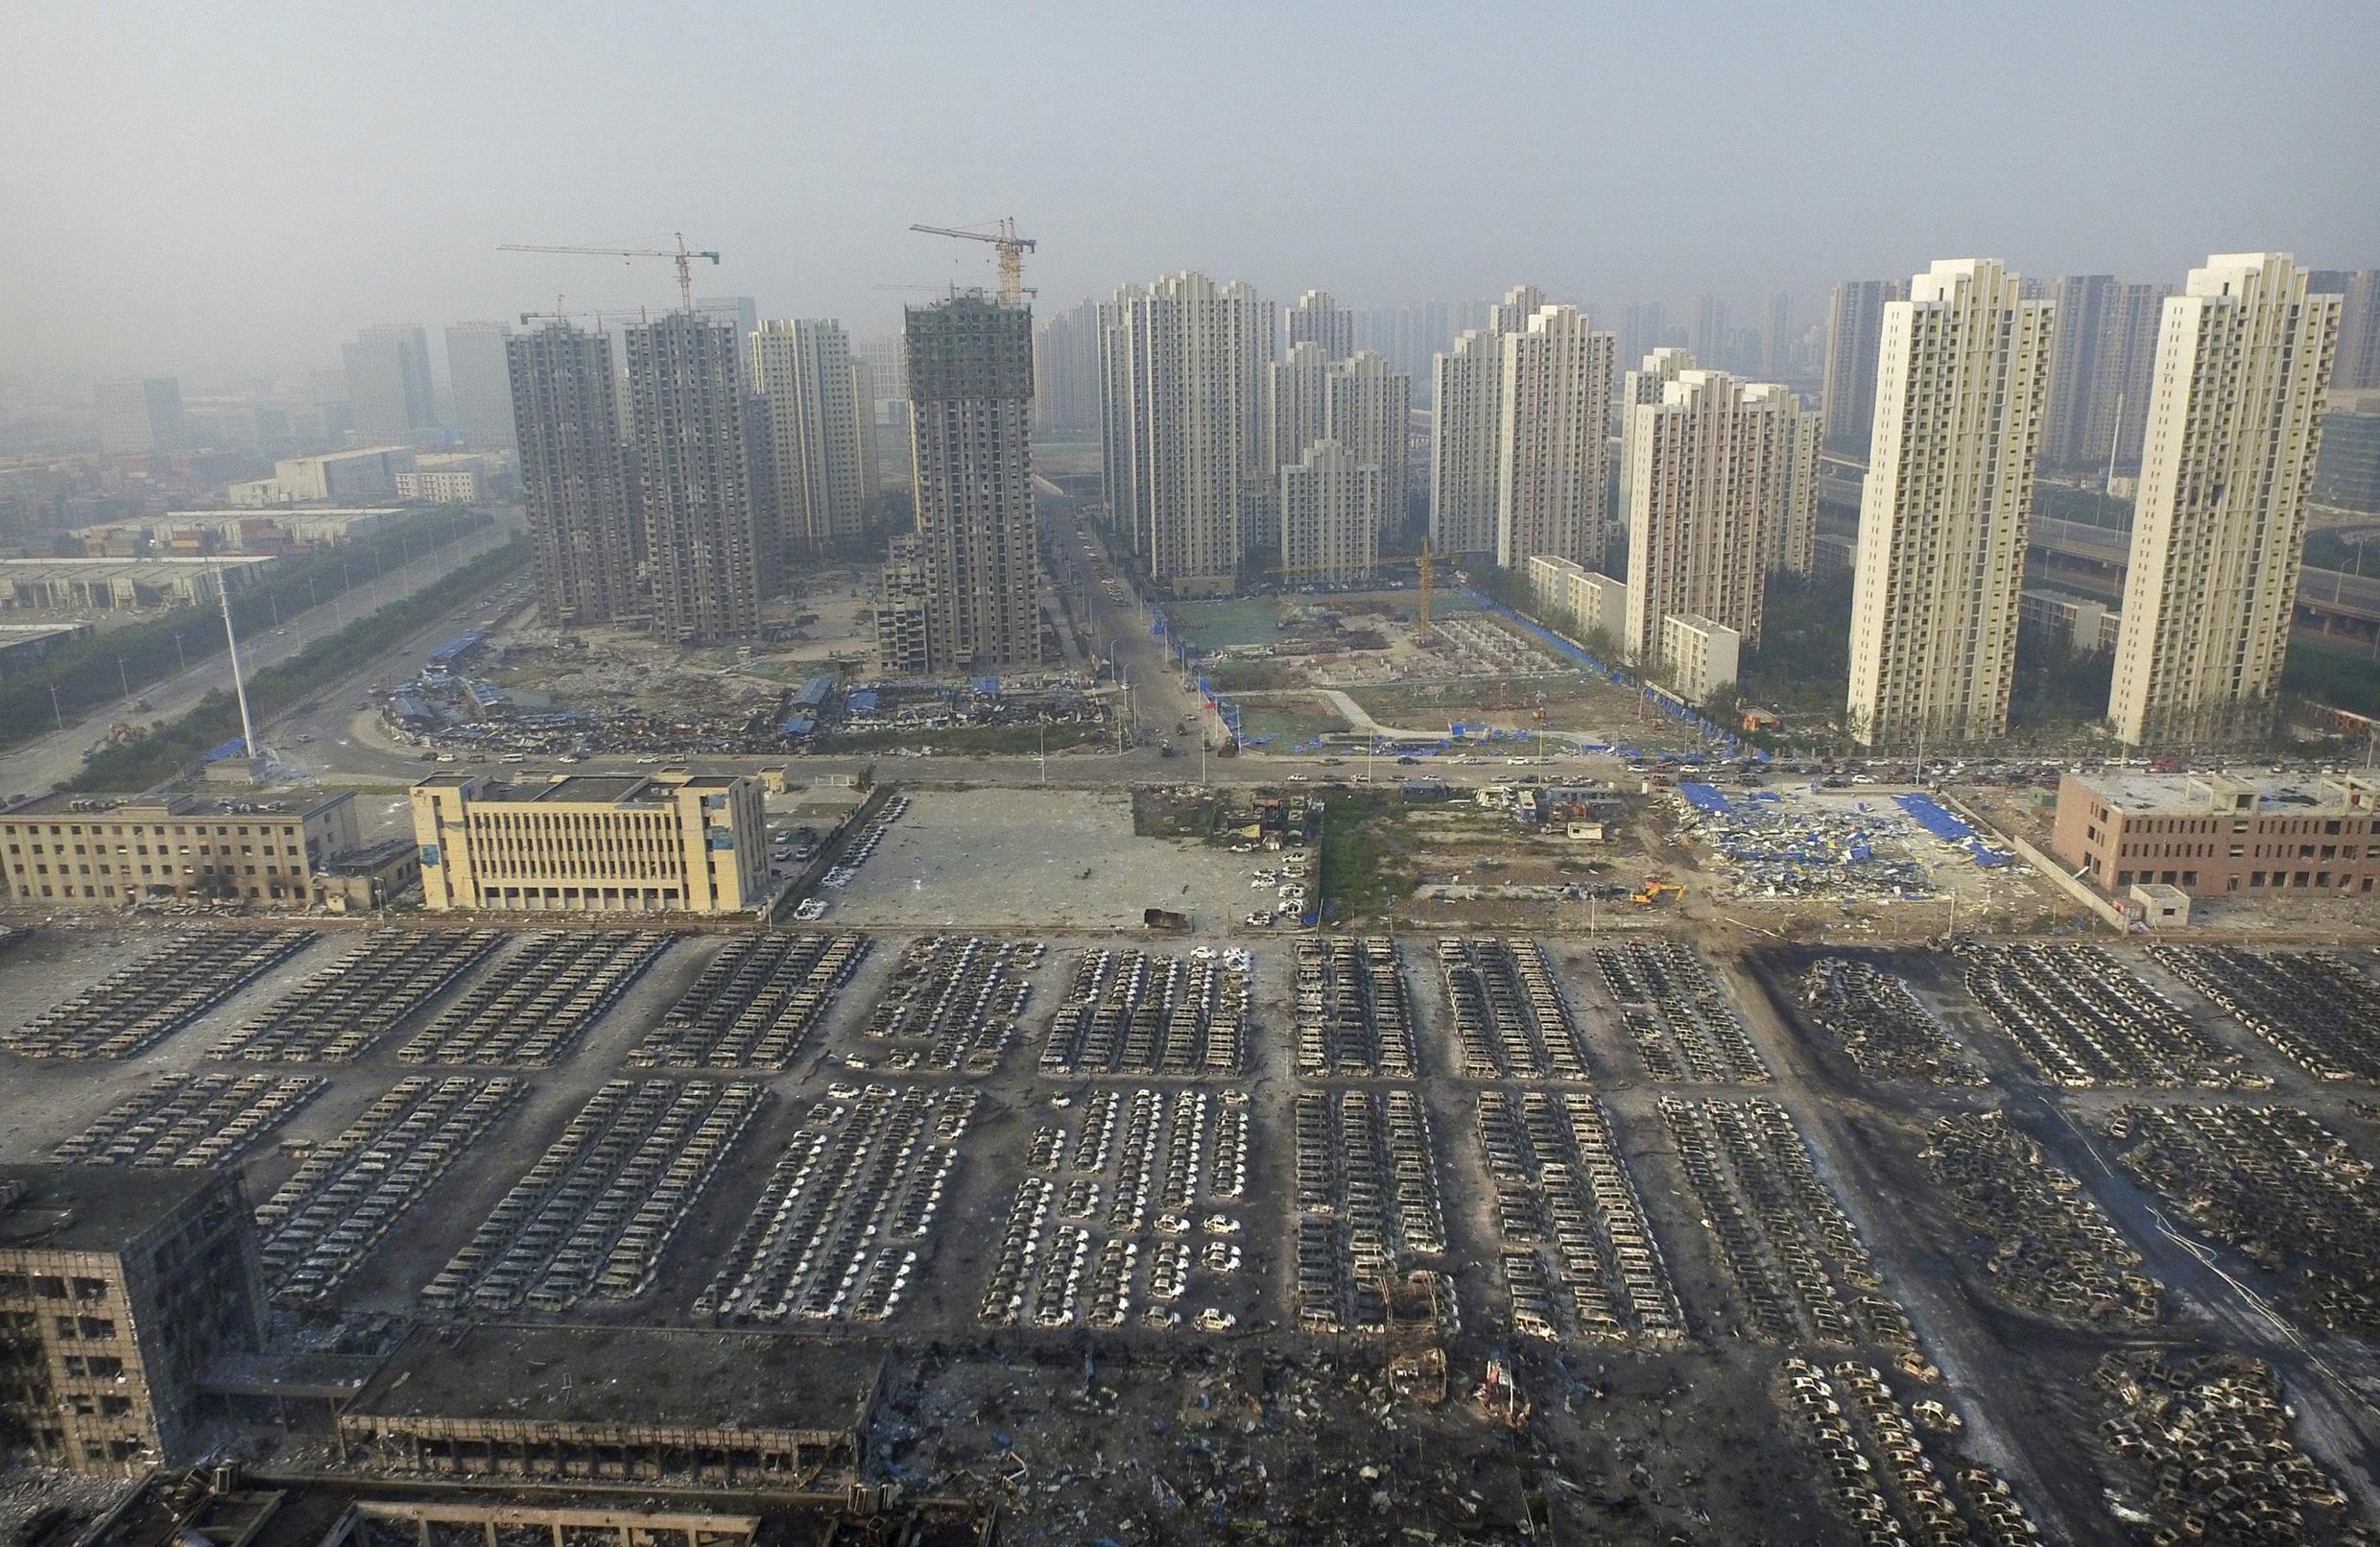 Construction sites and buildings under construction in Tianjin.  (illustrative image)